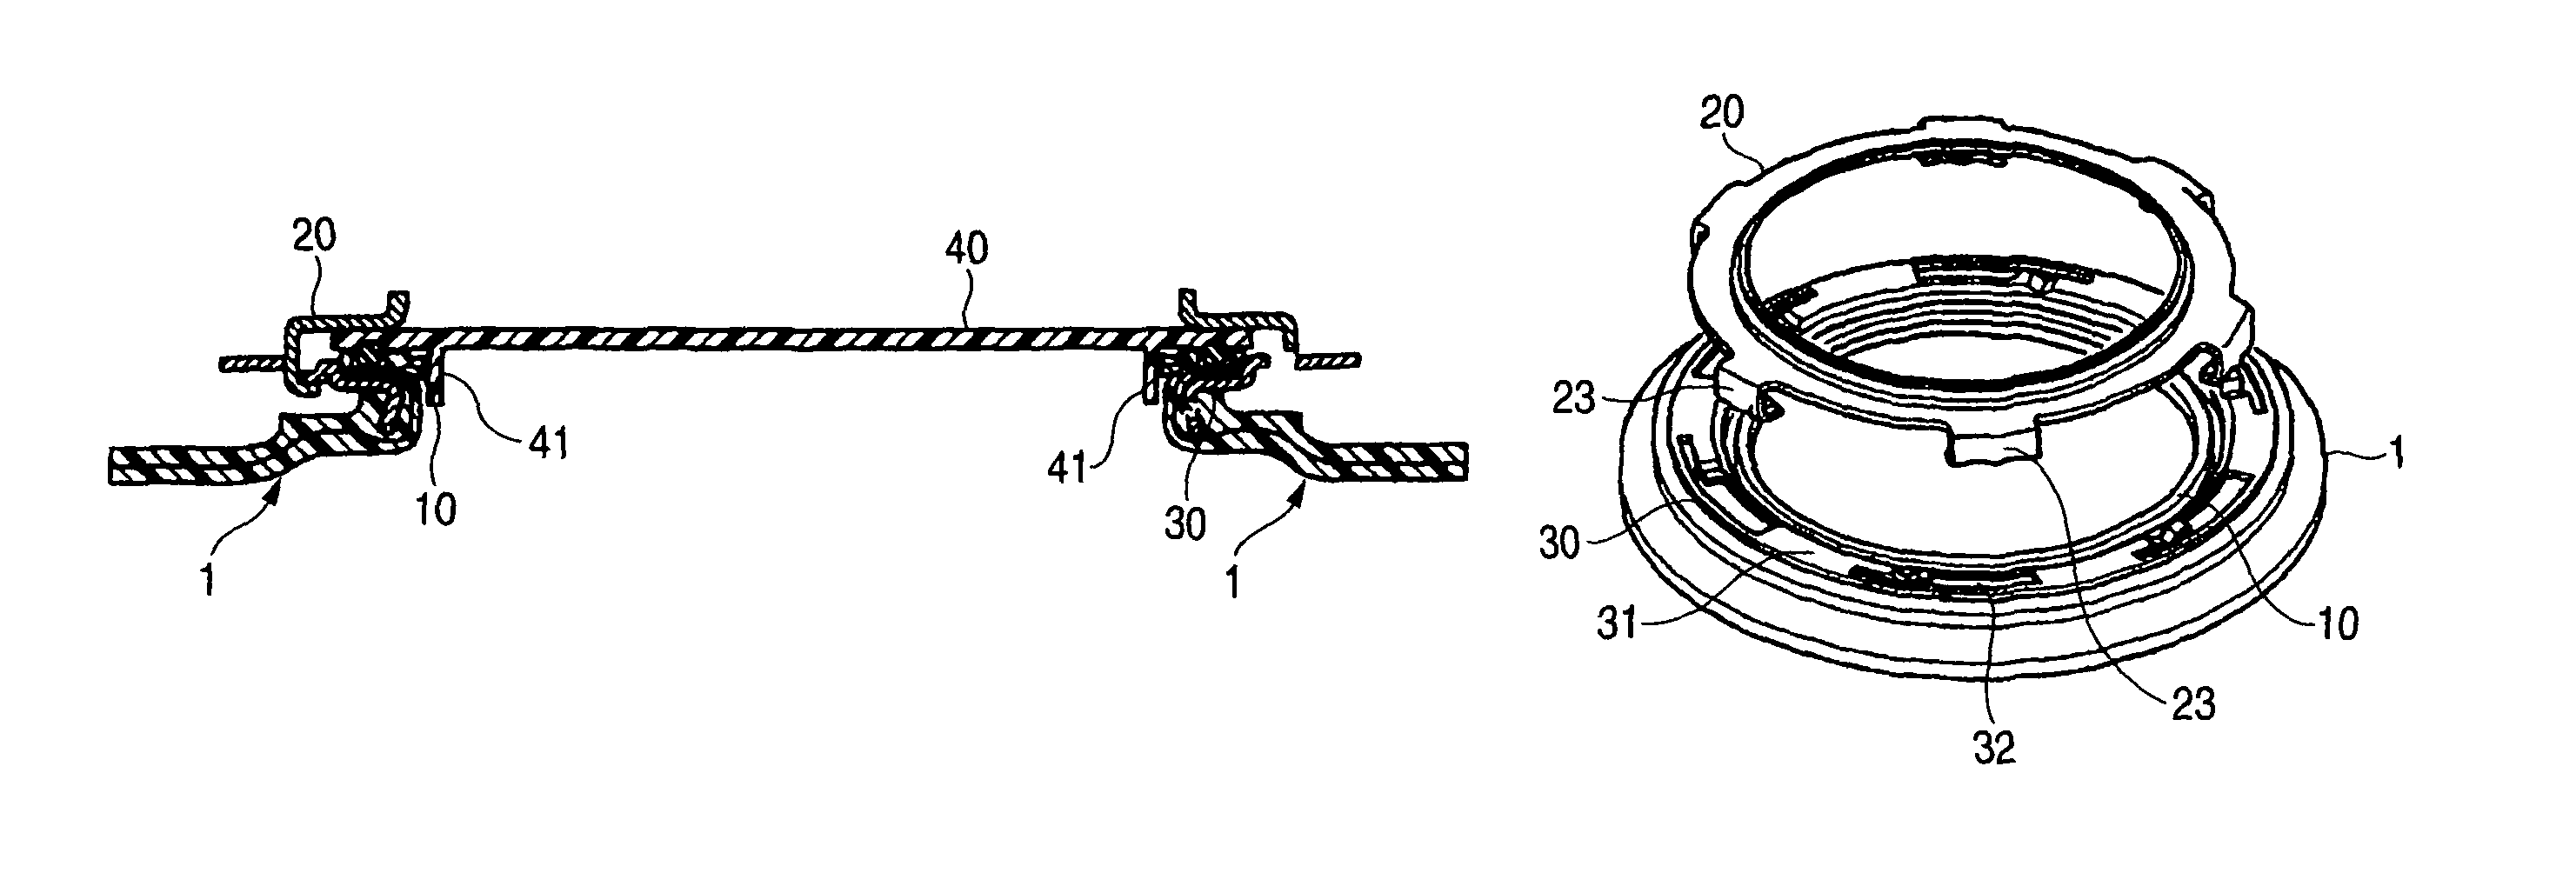 Opening structure of fuel tank and fabricating method thereof